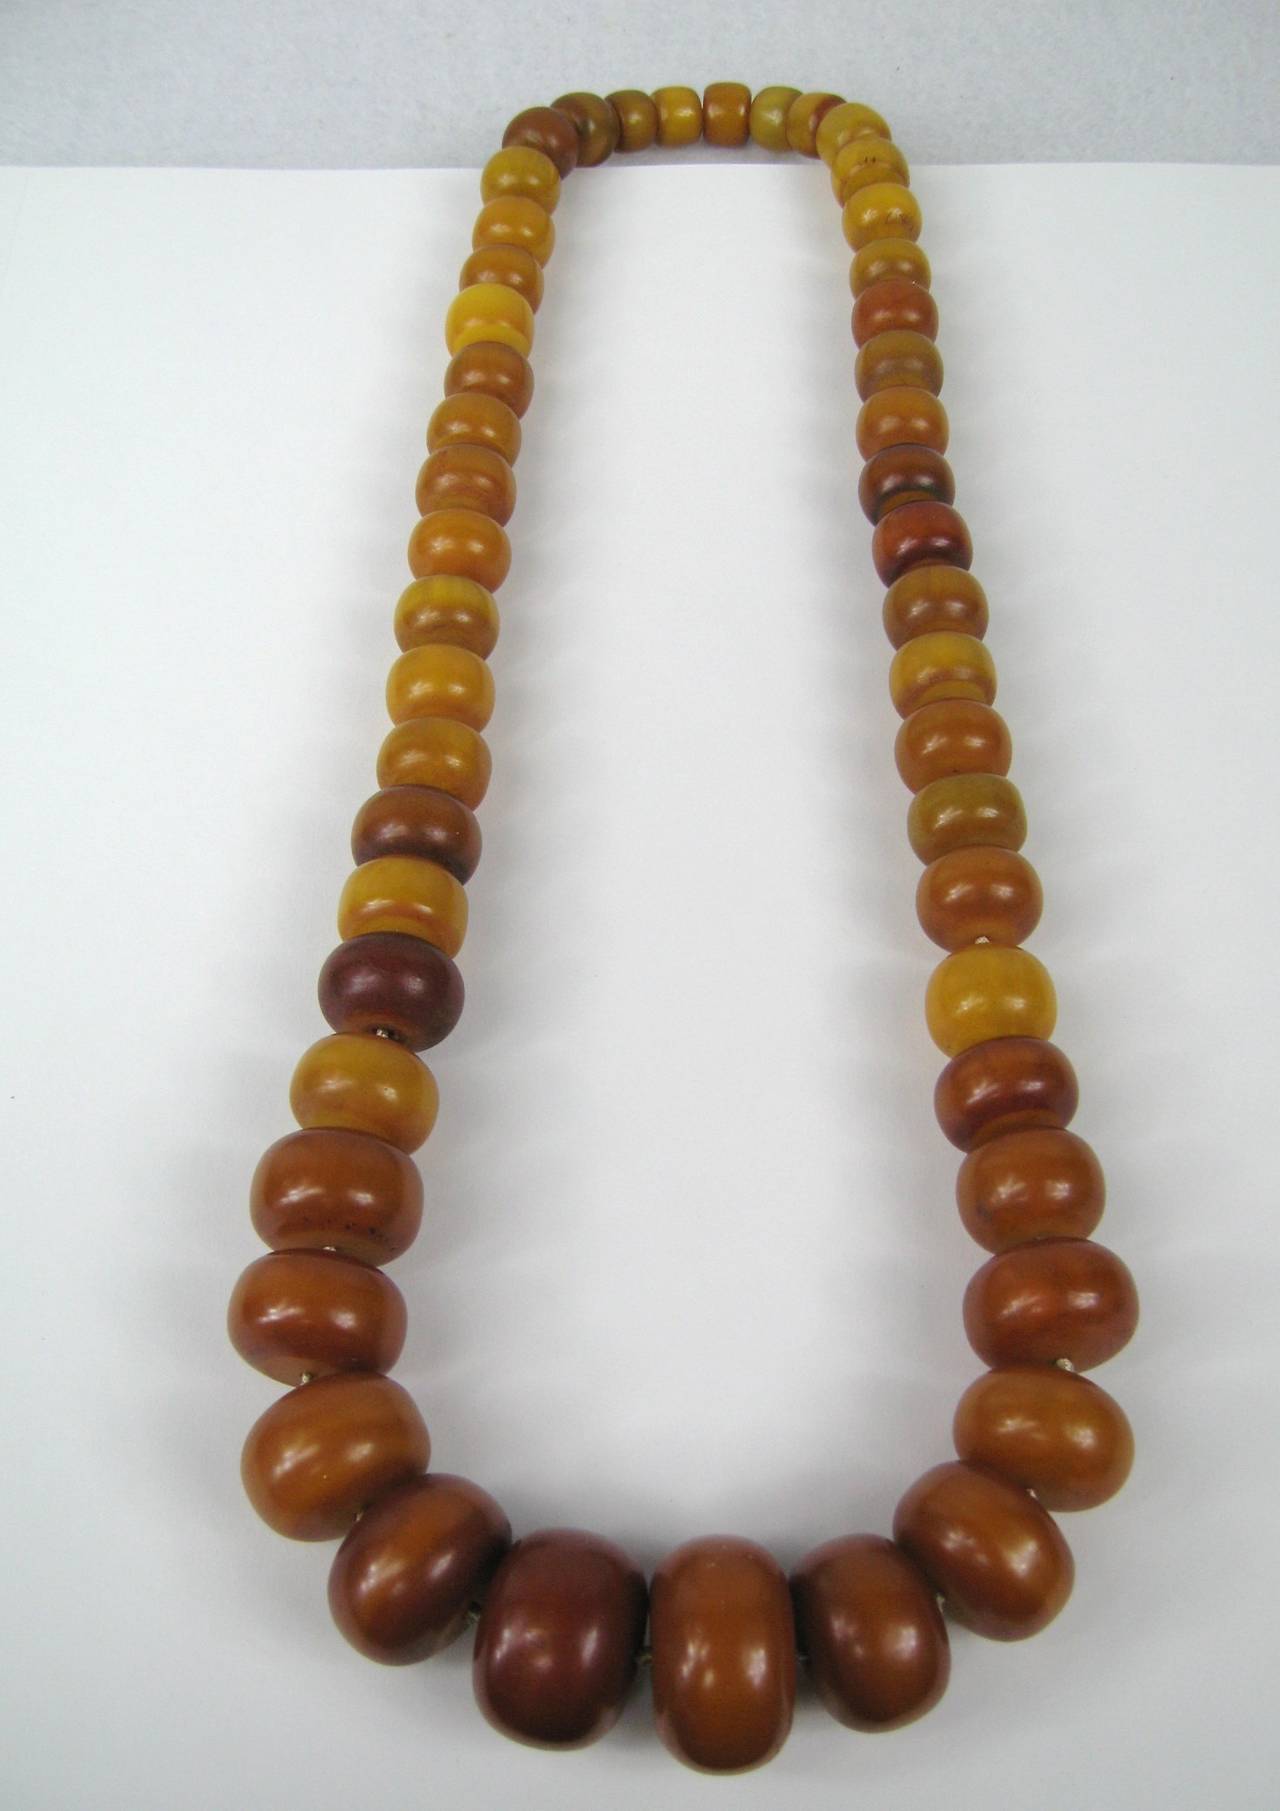 Wonderful early Amber Bakelite necklace. Beads graduate in size from 1.29 in or 32.63mm x.76 in or 19.50mm down to .43 inches or 11.7mm x .58 inches or 14.77mm. 30 inches long. No clasp, goes over you head. This is out of a massive collection of